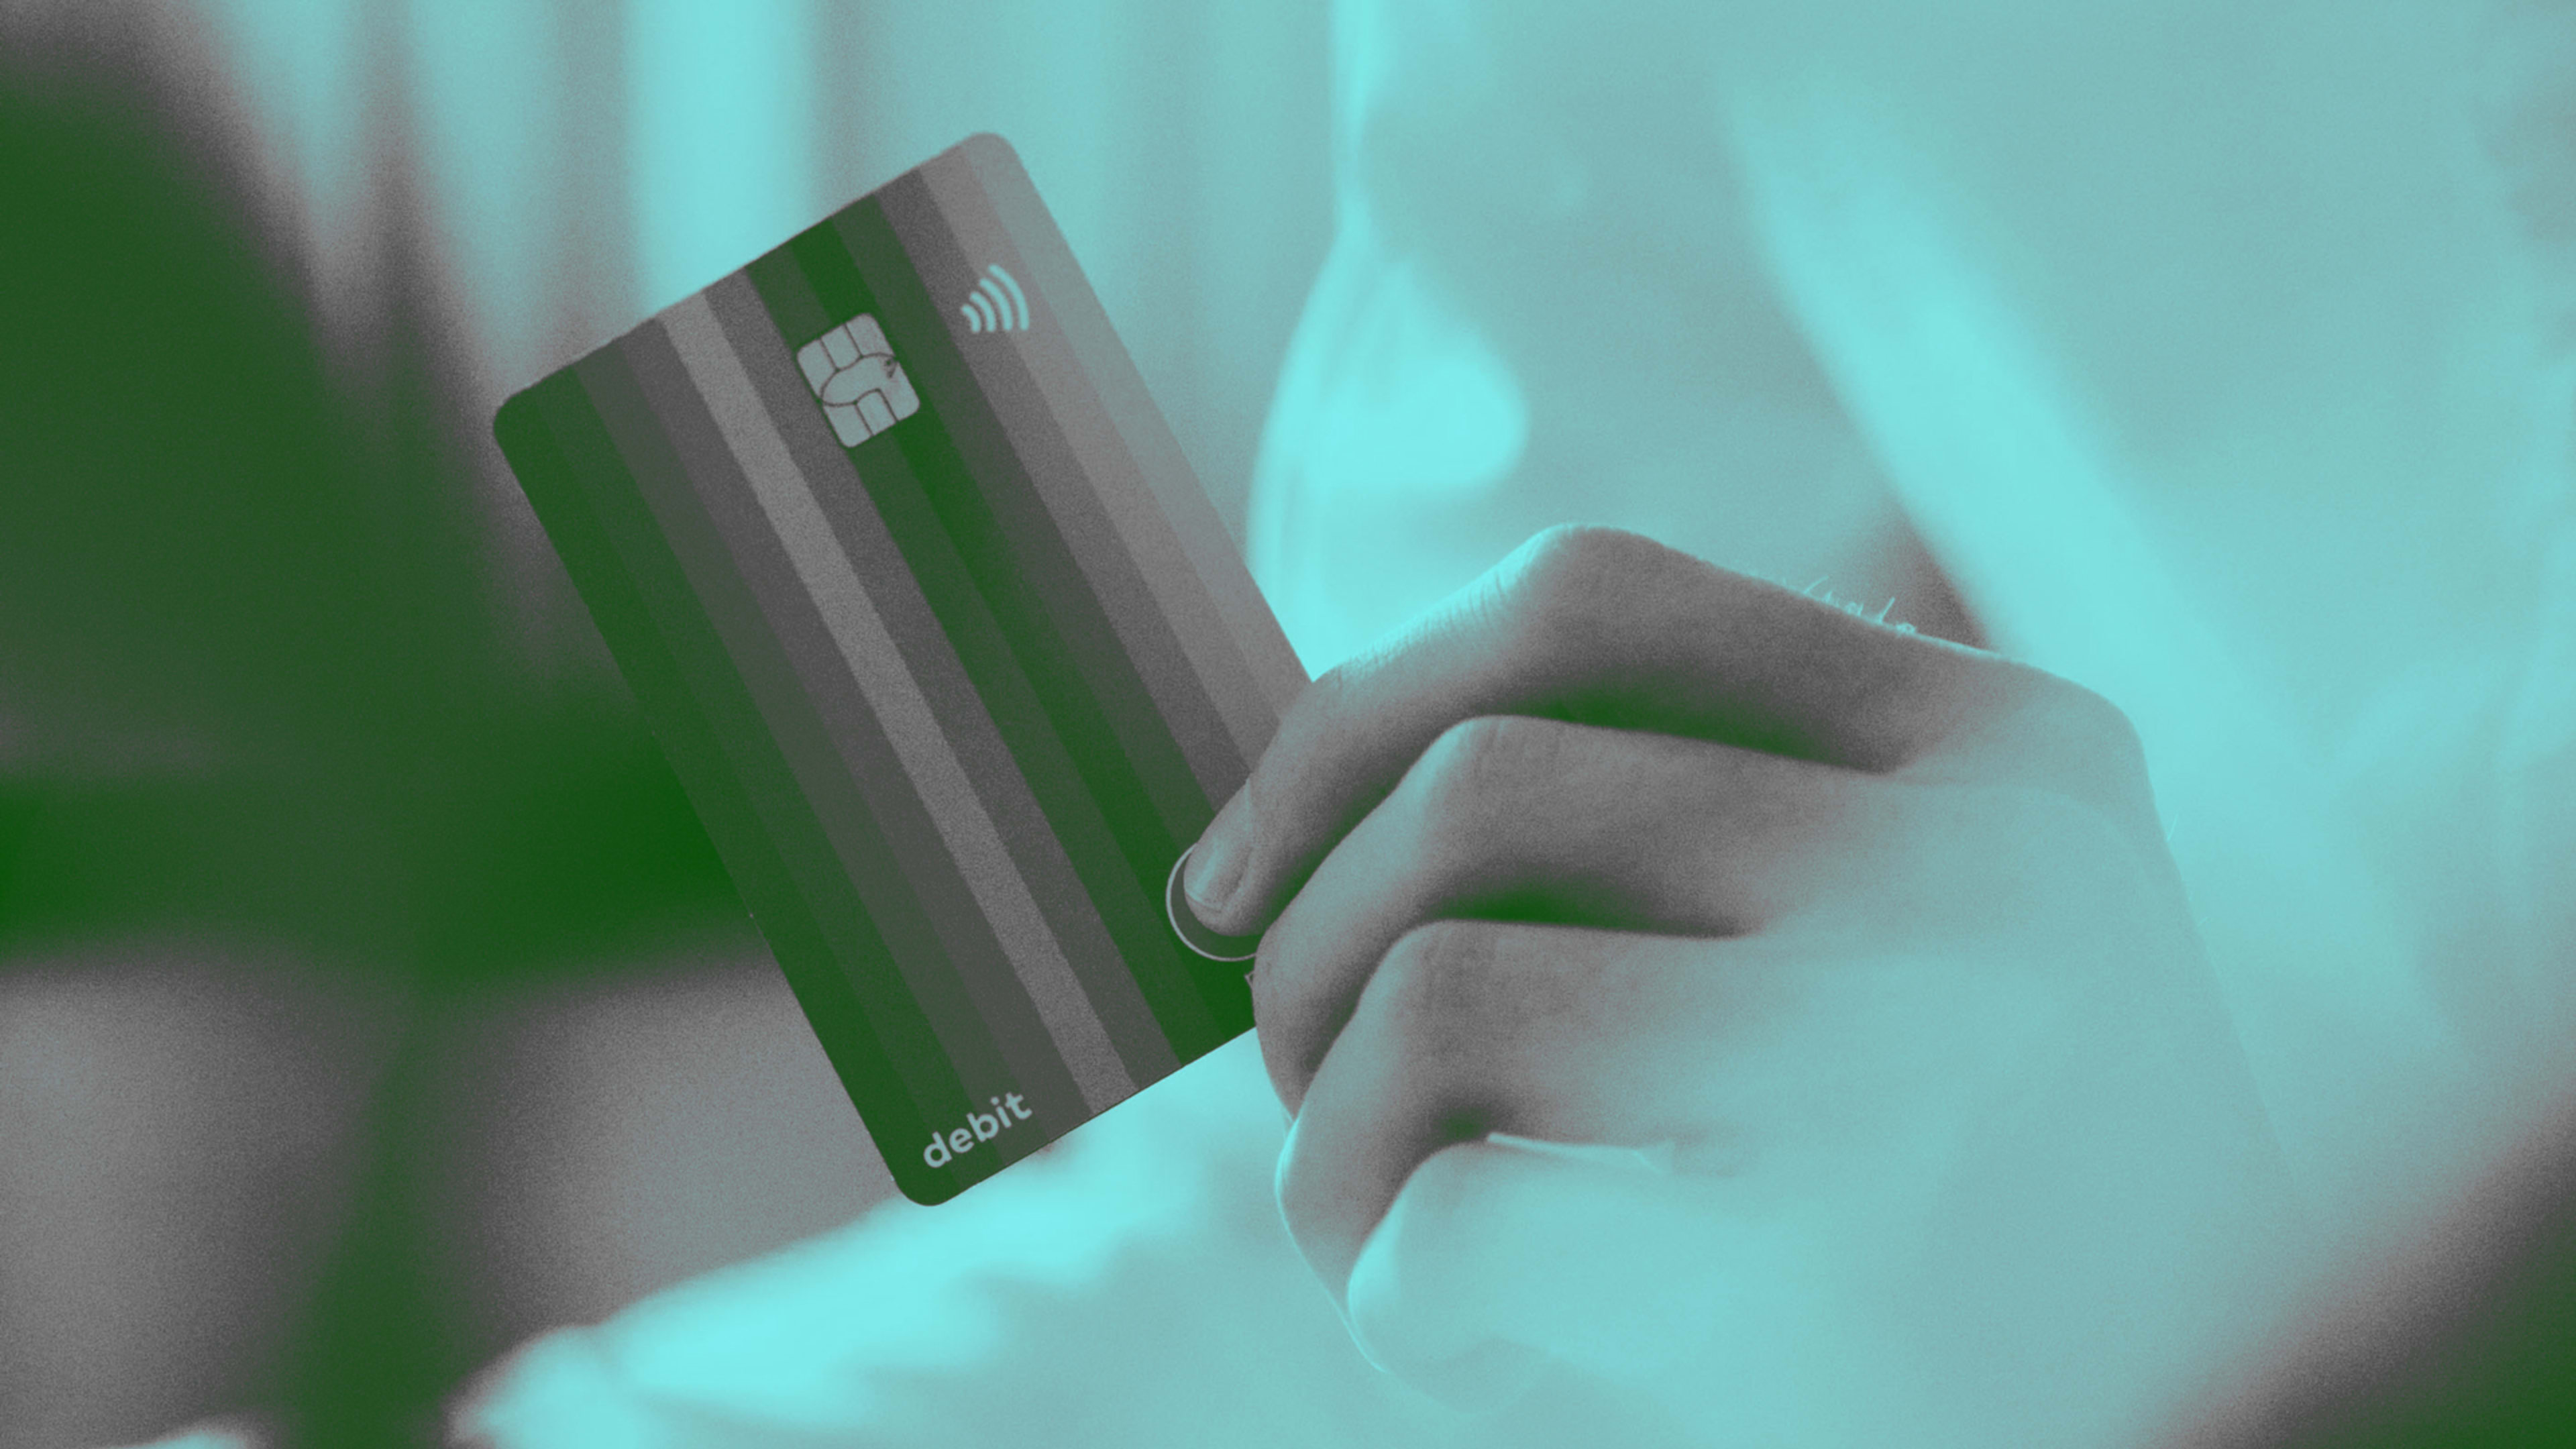 Still waiting for an IRS stimulus check? You might get this debit card instead